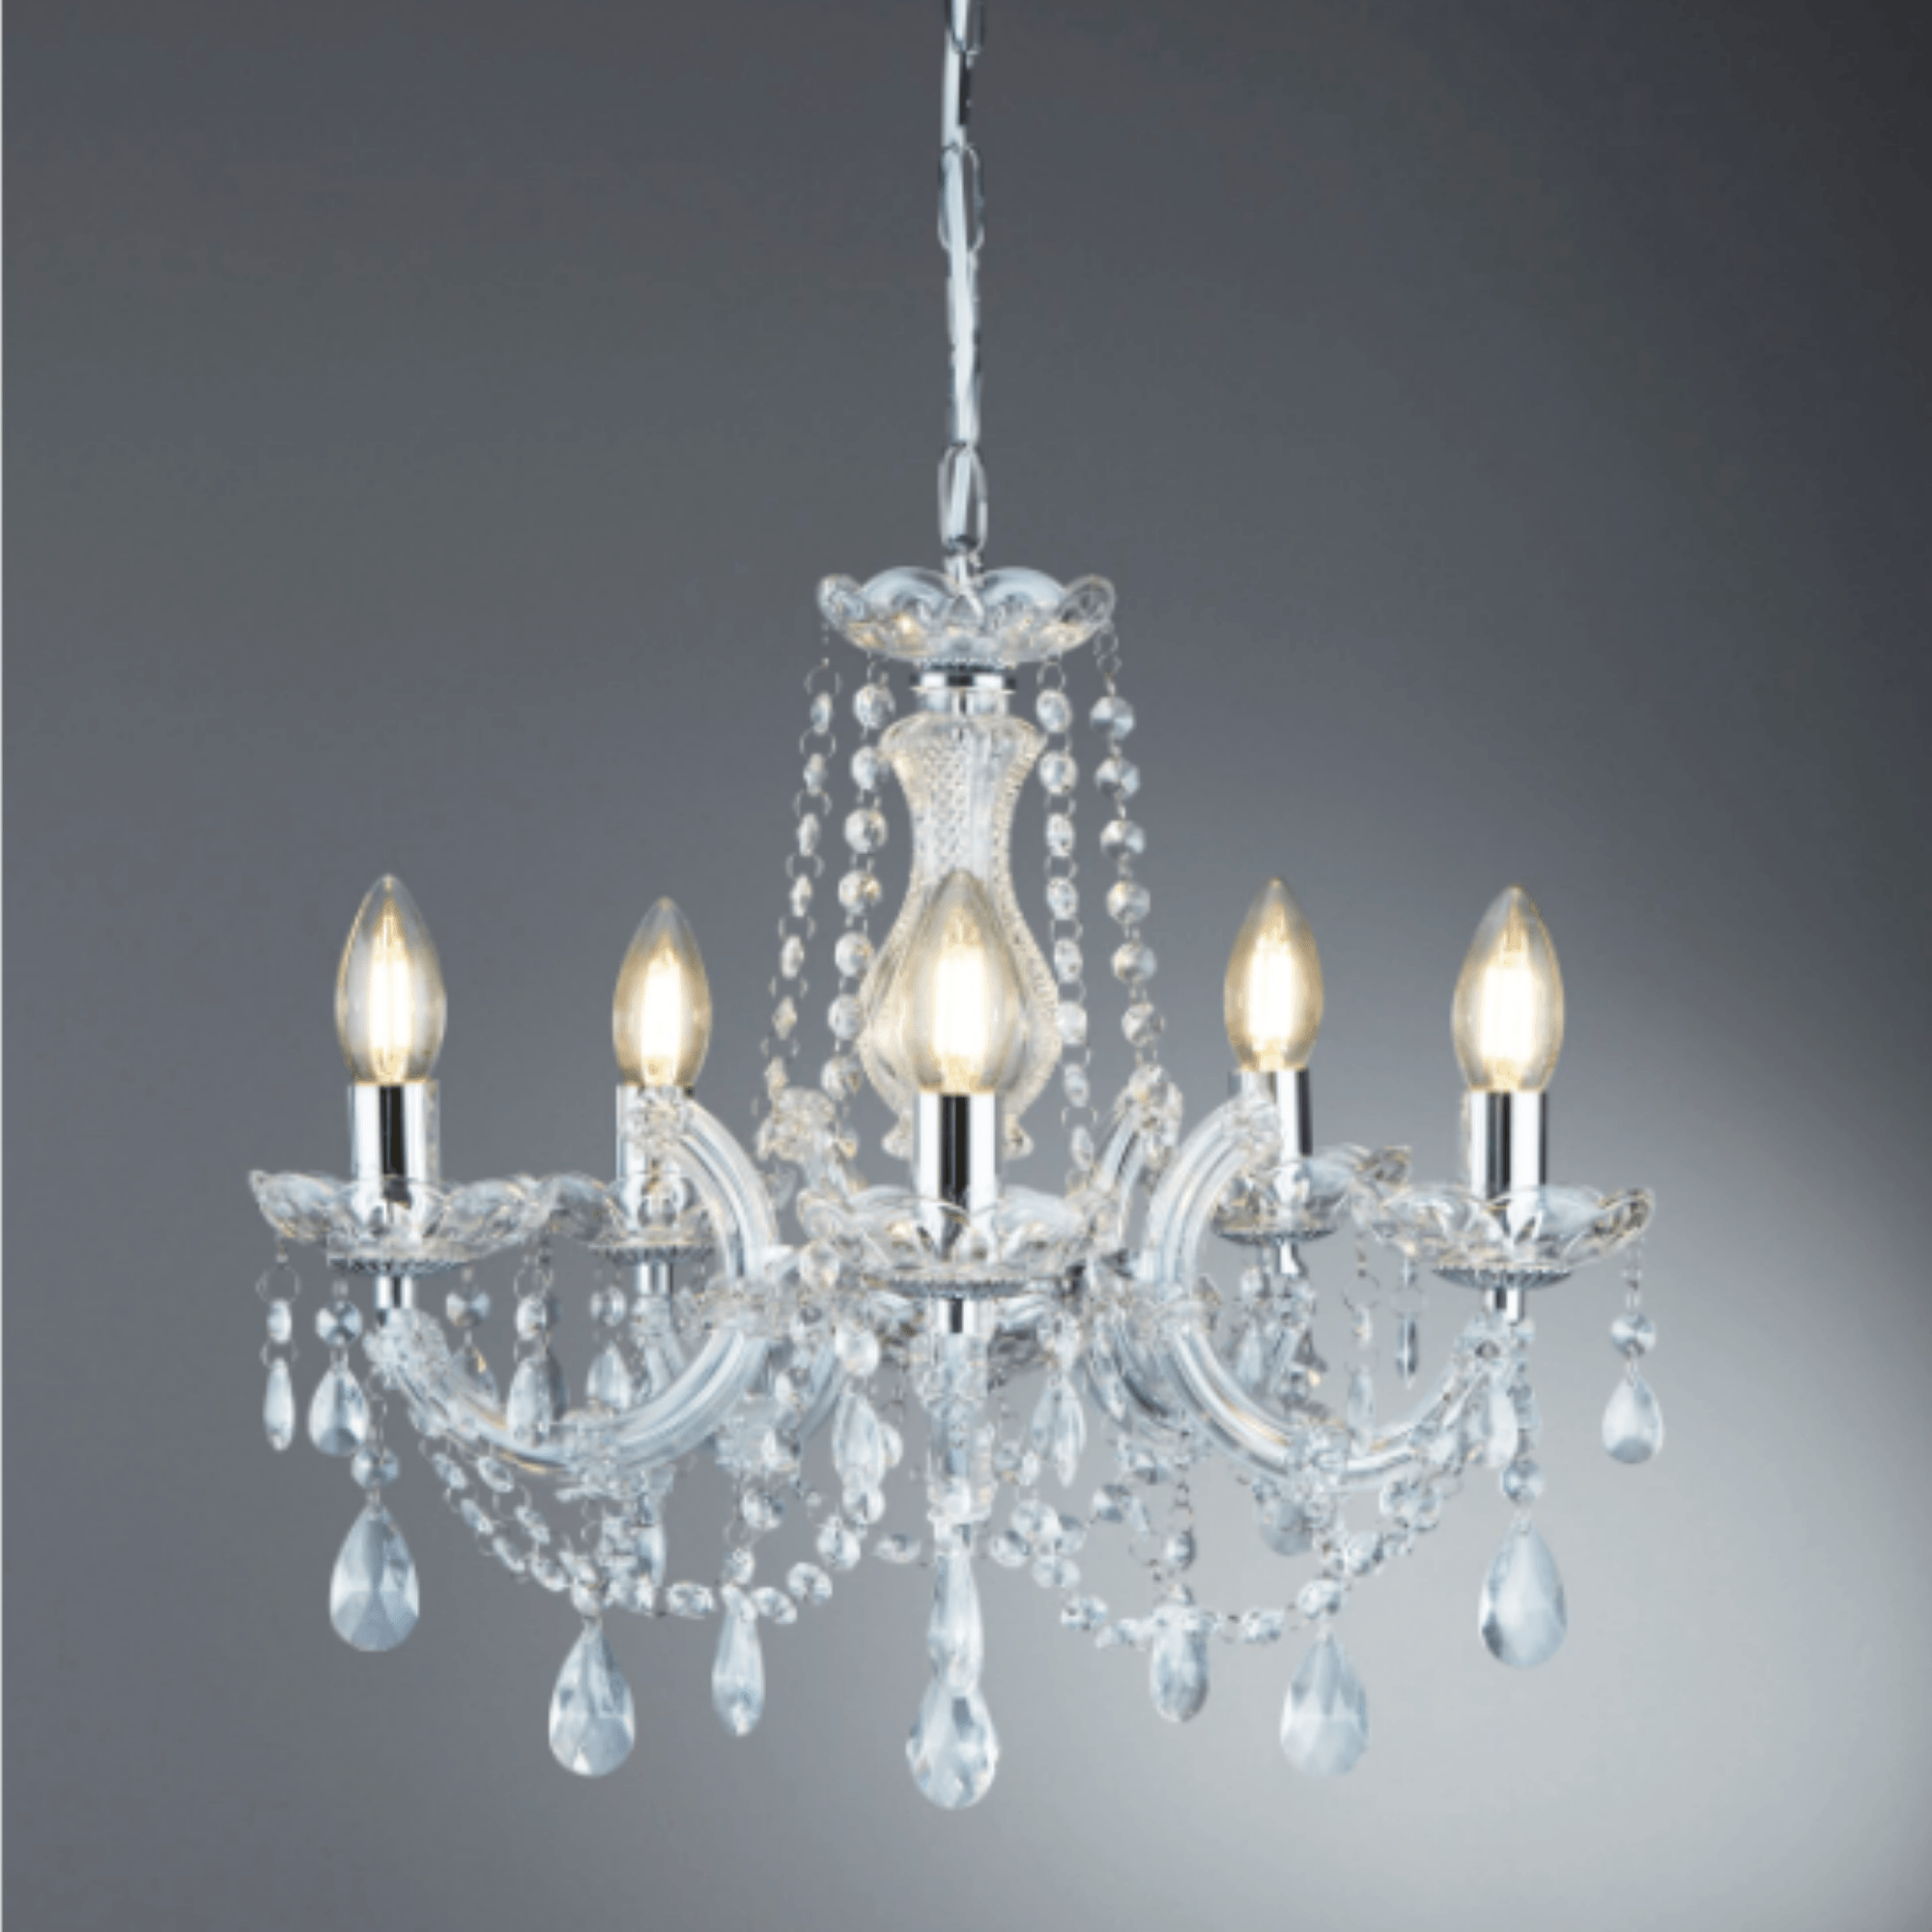 399-5 CHANDELIER LIGHT FITTING MARIE THERESE - Cusack Lighting